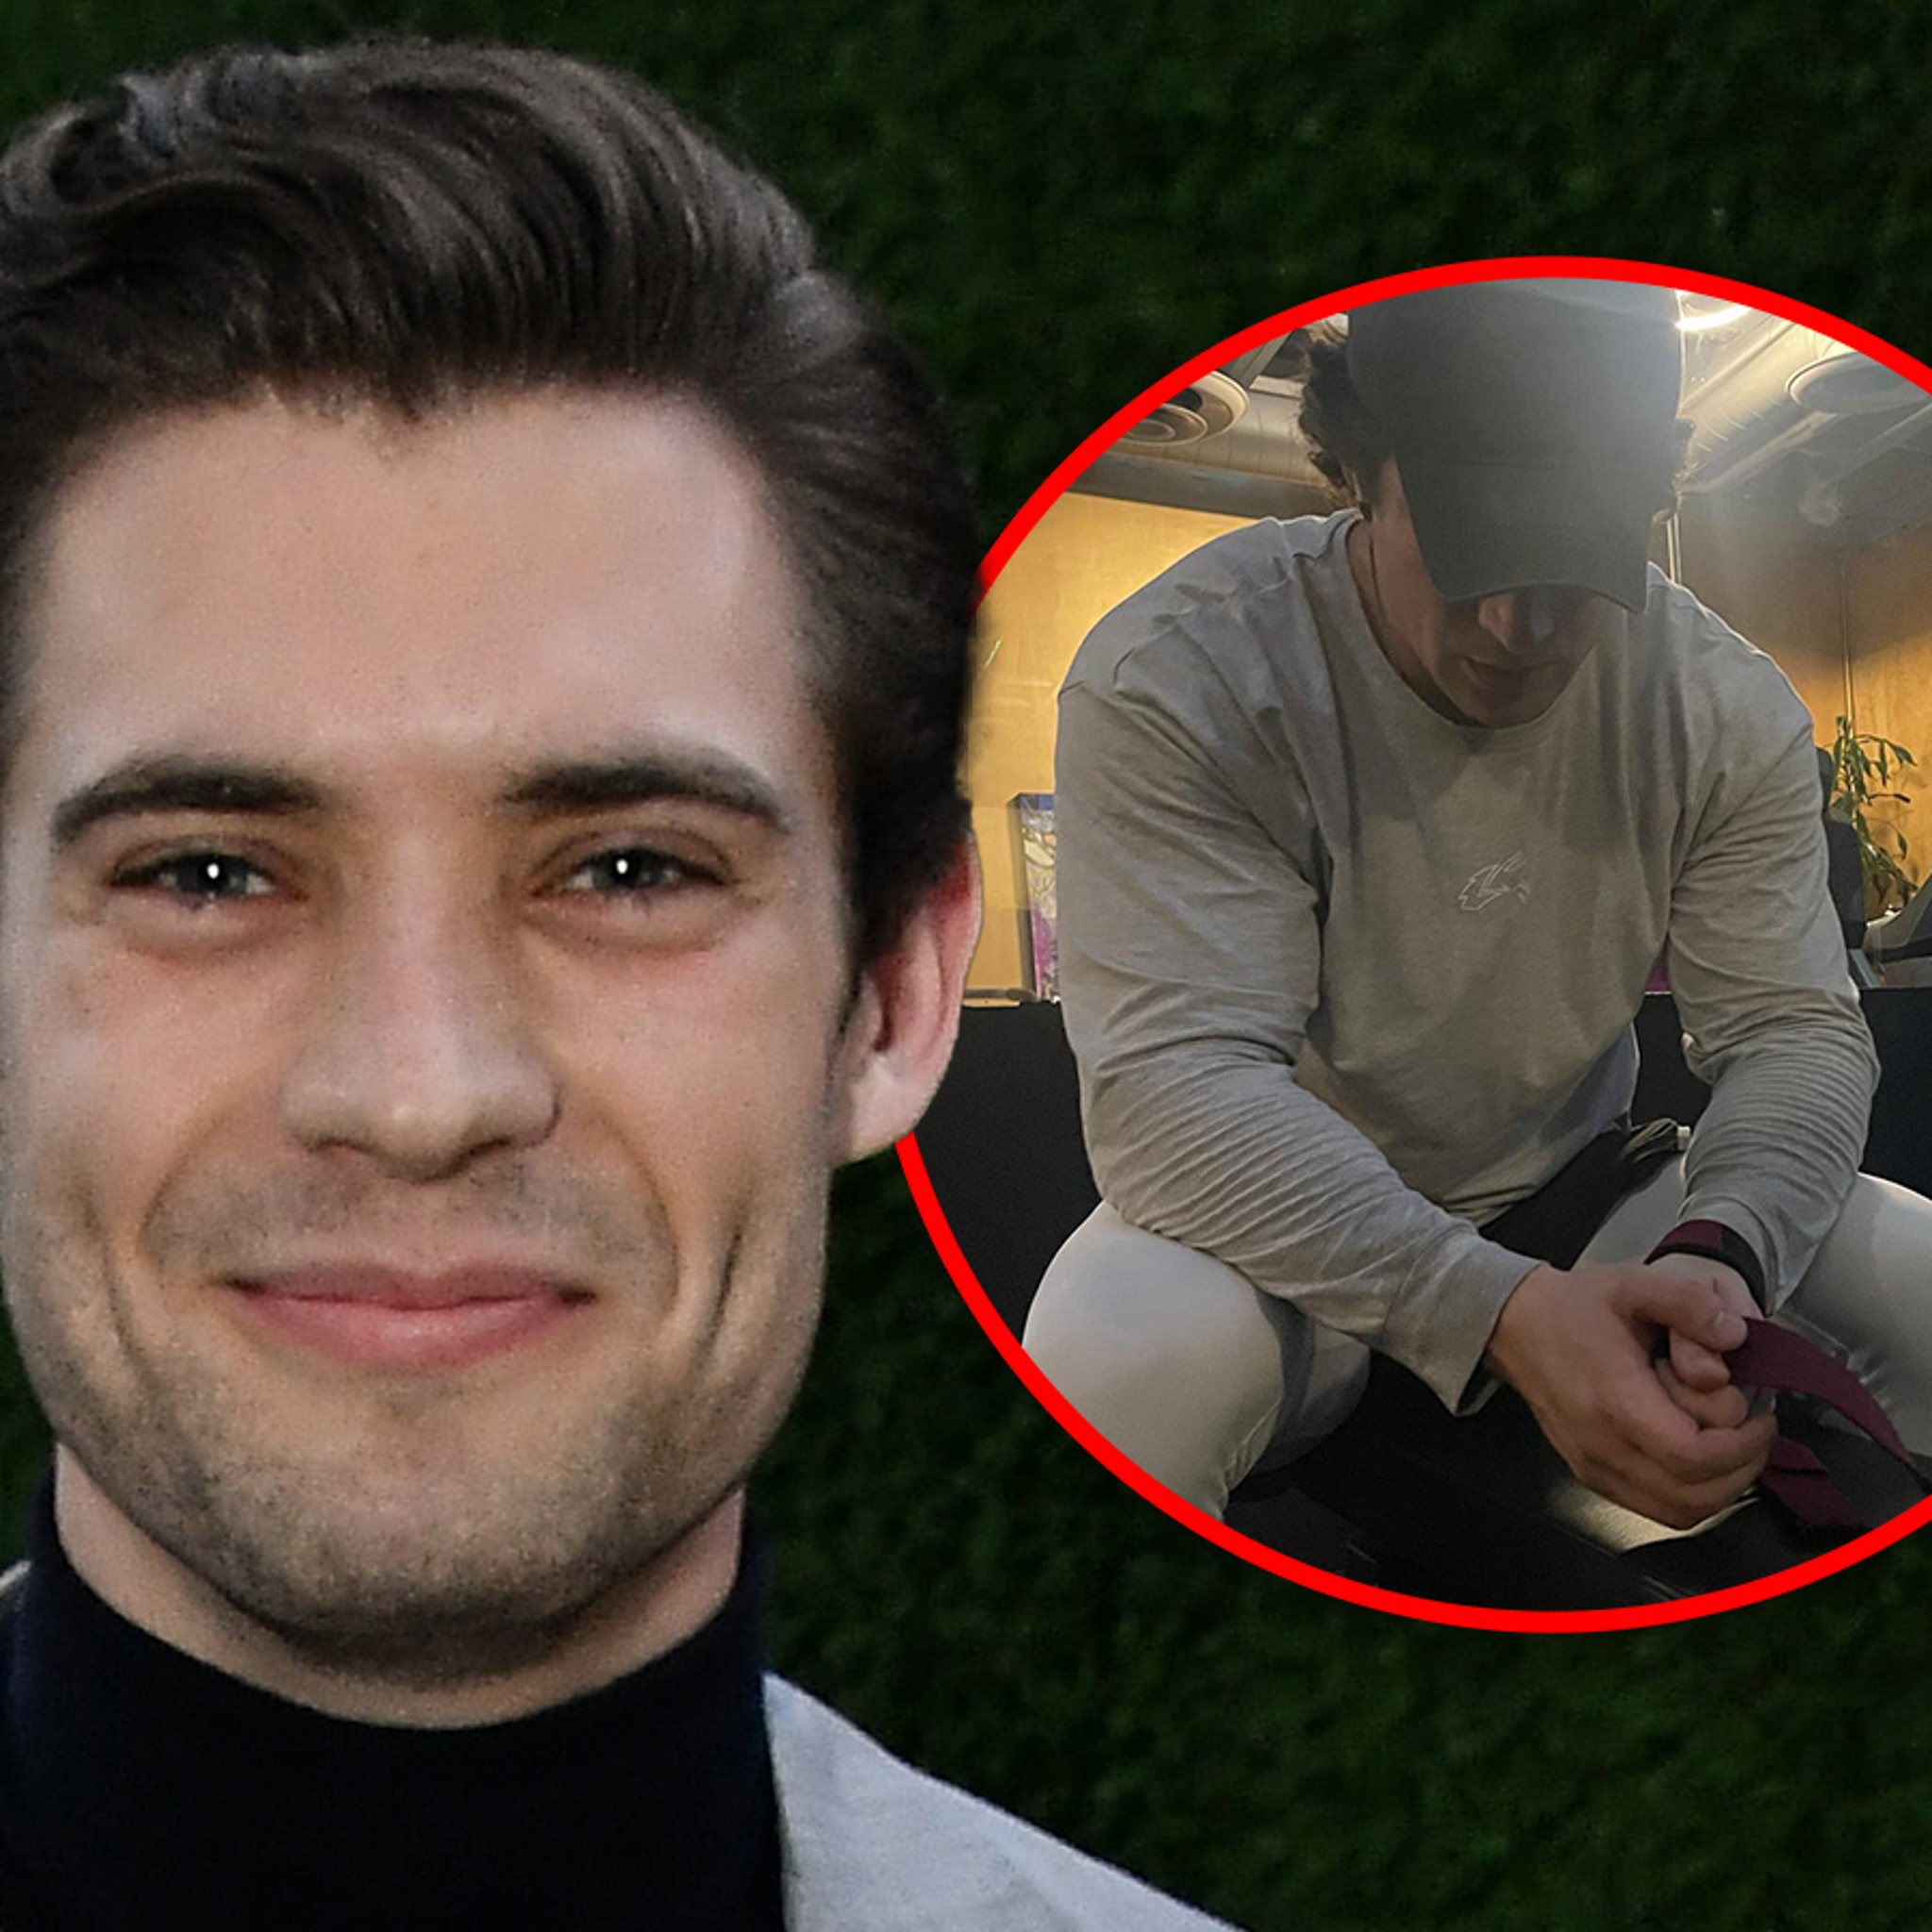 Henry Cavill seen for the FIRST time since David Corenswet